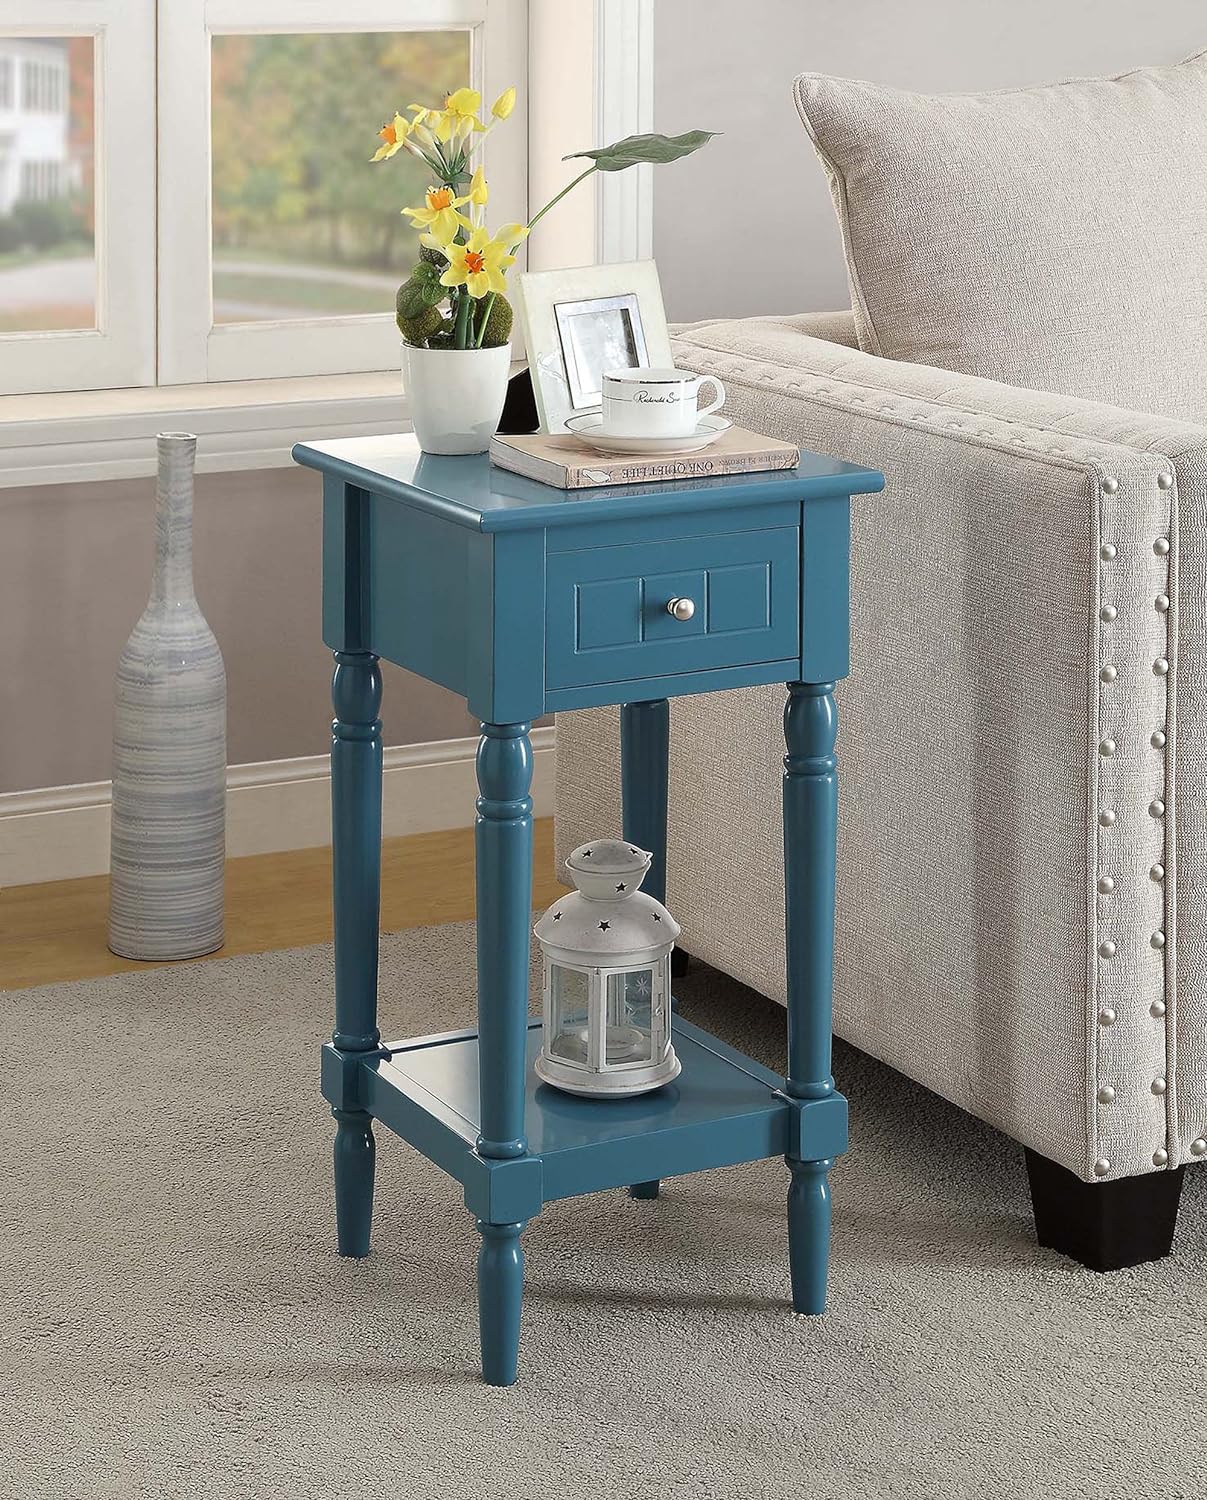 Convenience Concepts French Country Khloe Accent Table, Blue